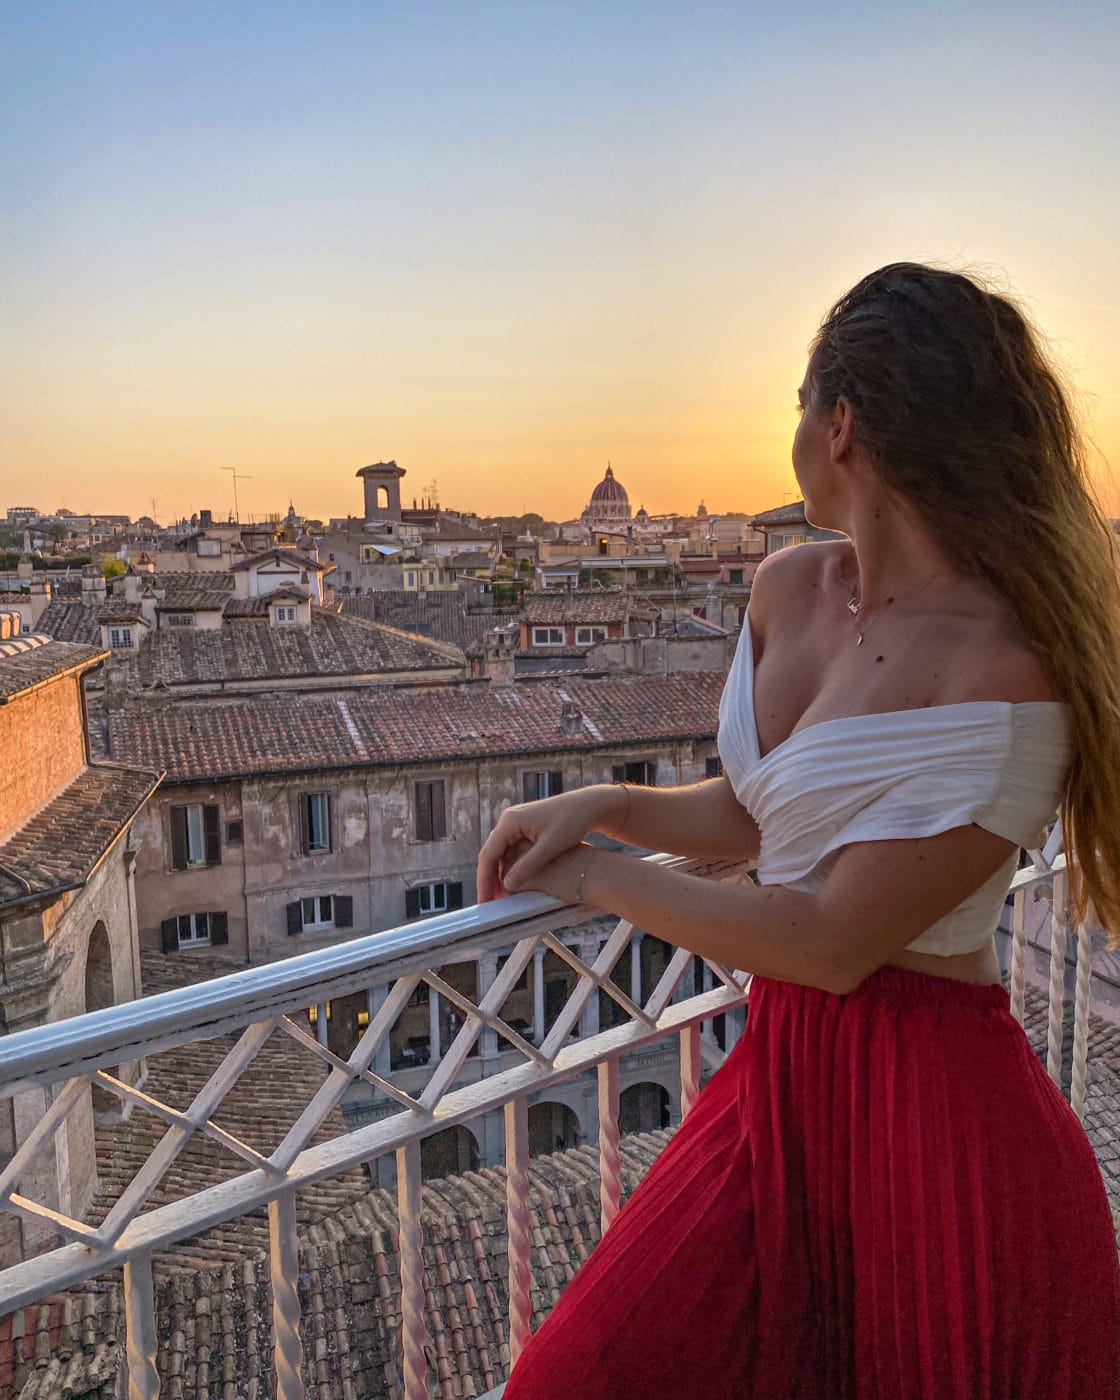 The views from a rooftop in Rome, Italy